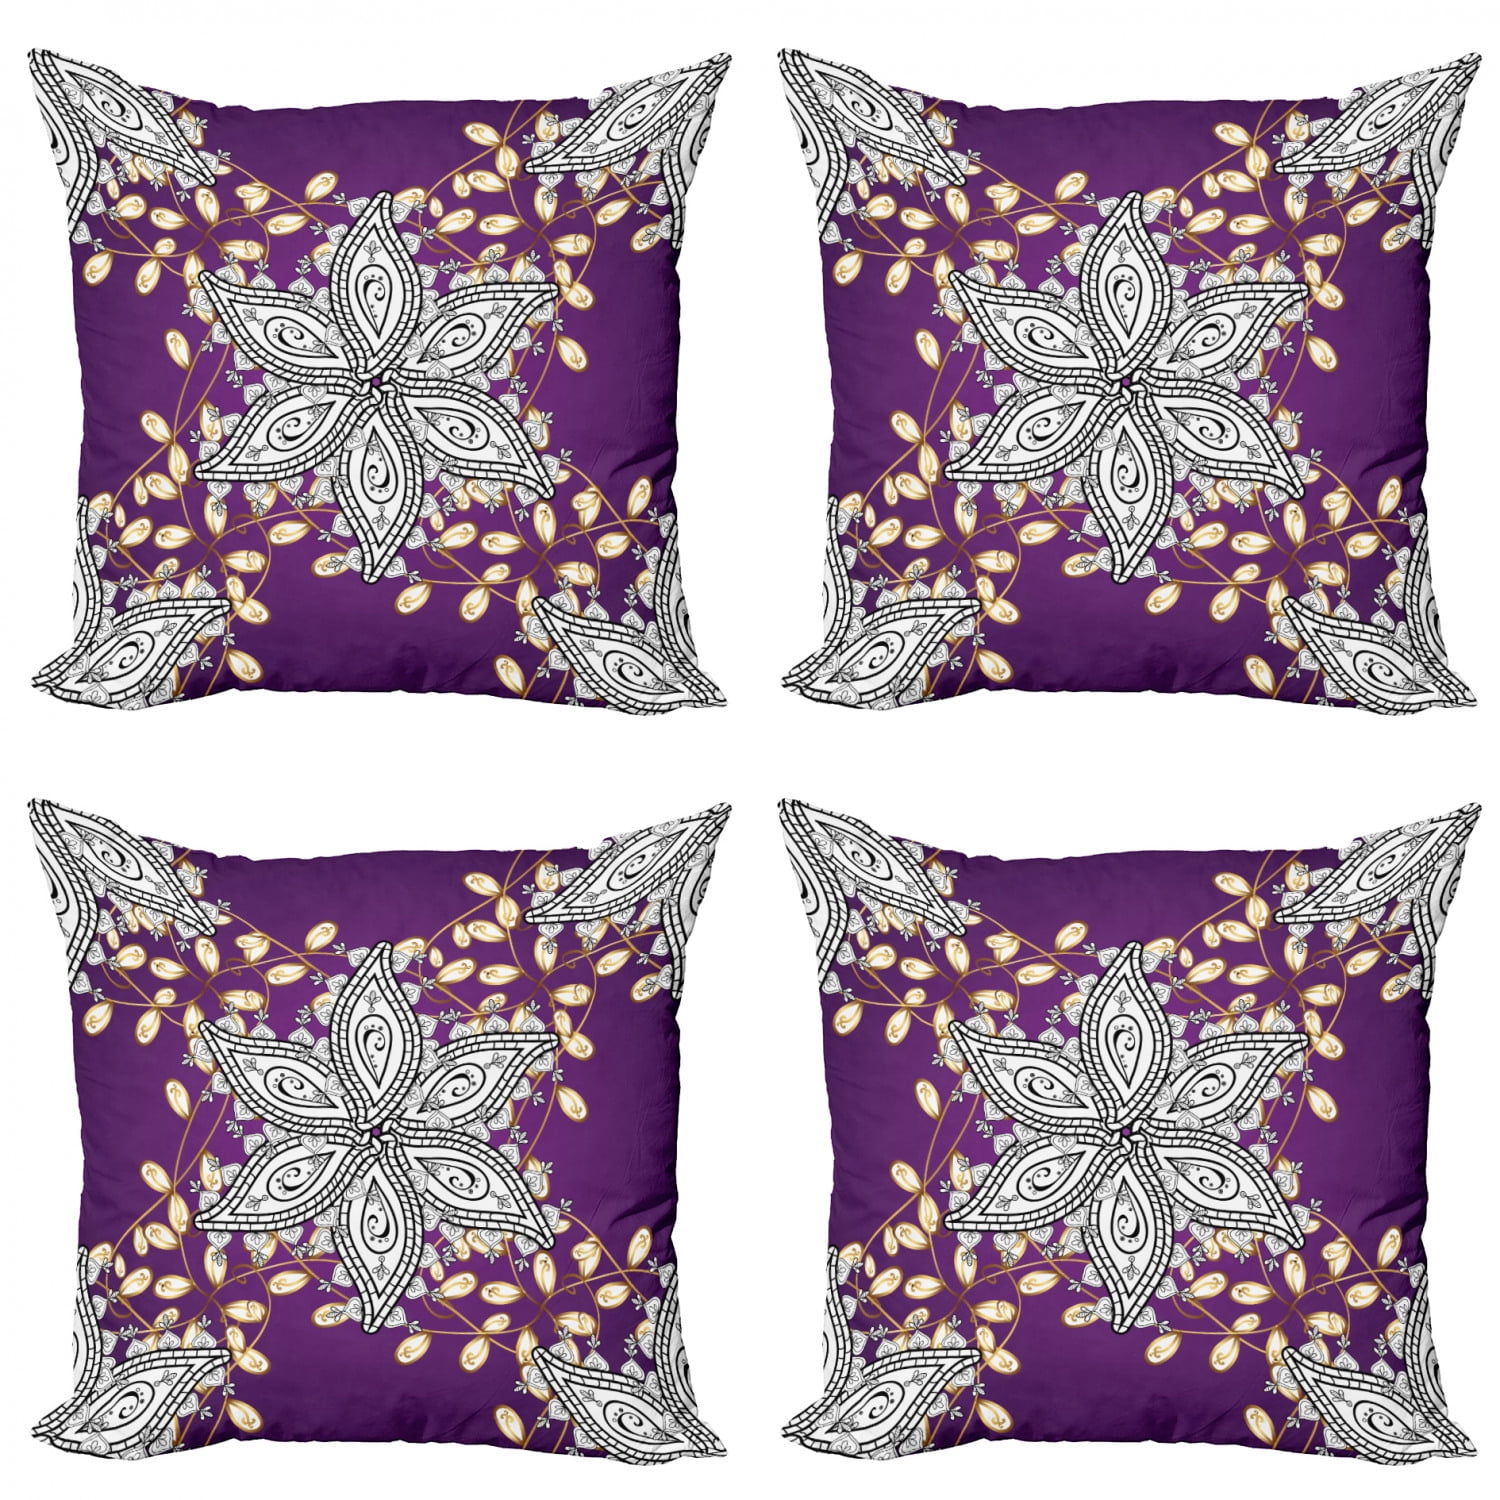 POM POMS Moroccan Vintage Pillow Cushion Cover 